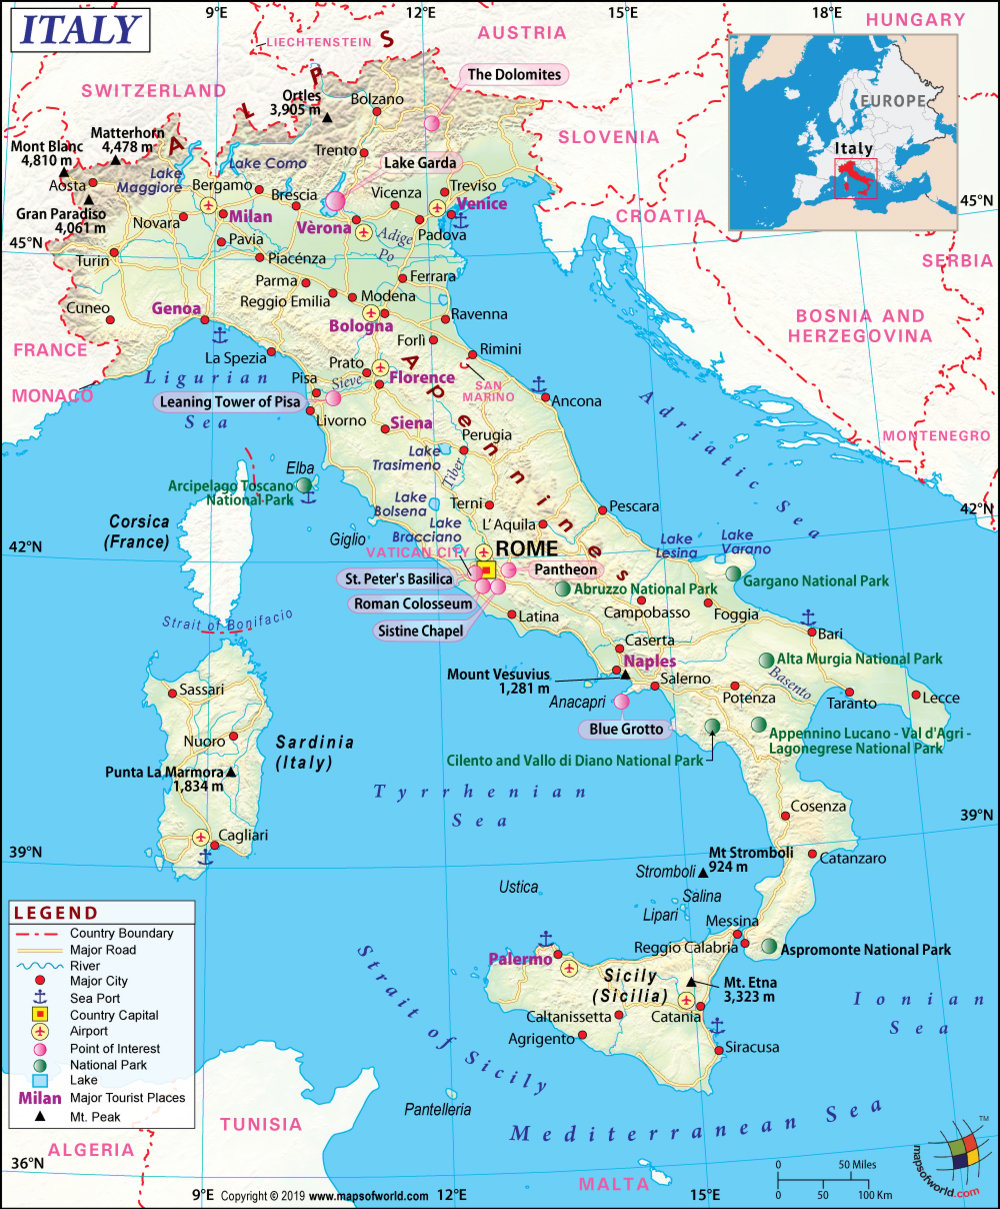 What are the three main rivers in Italy?